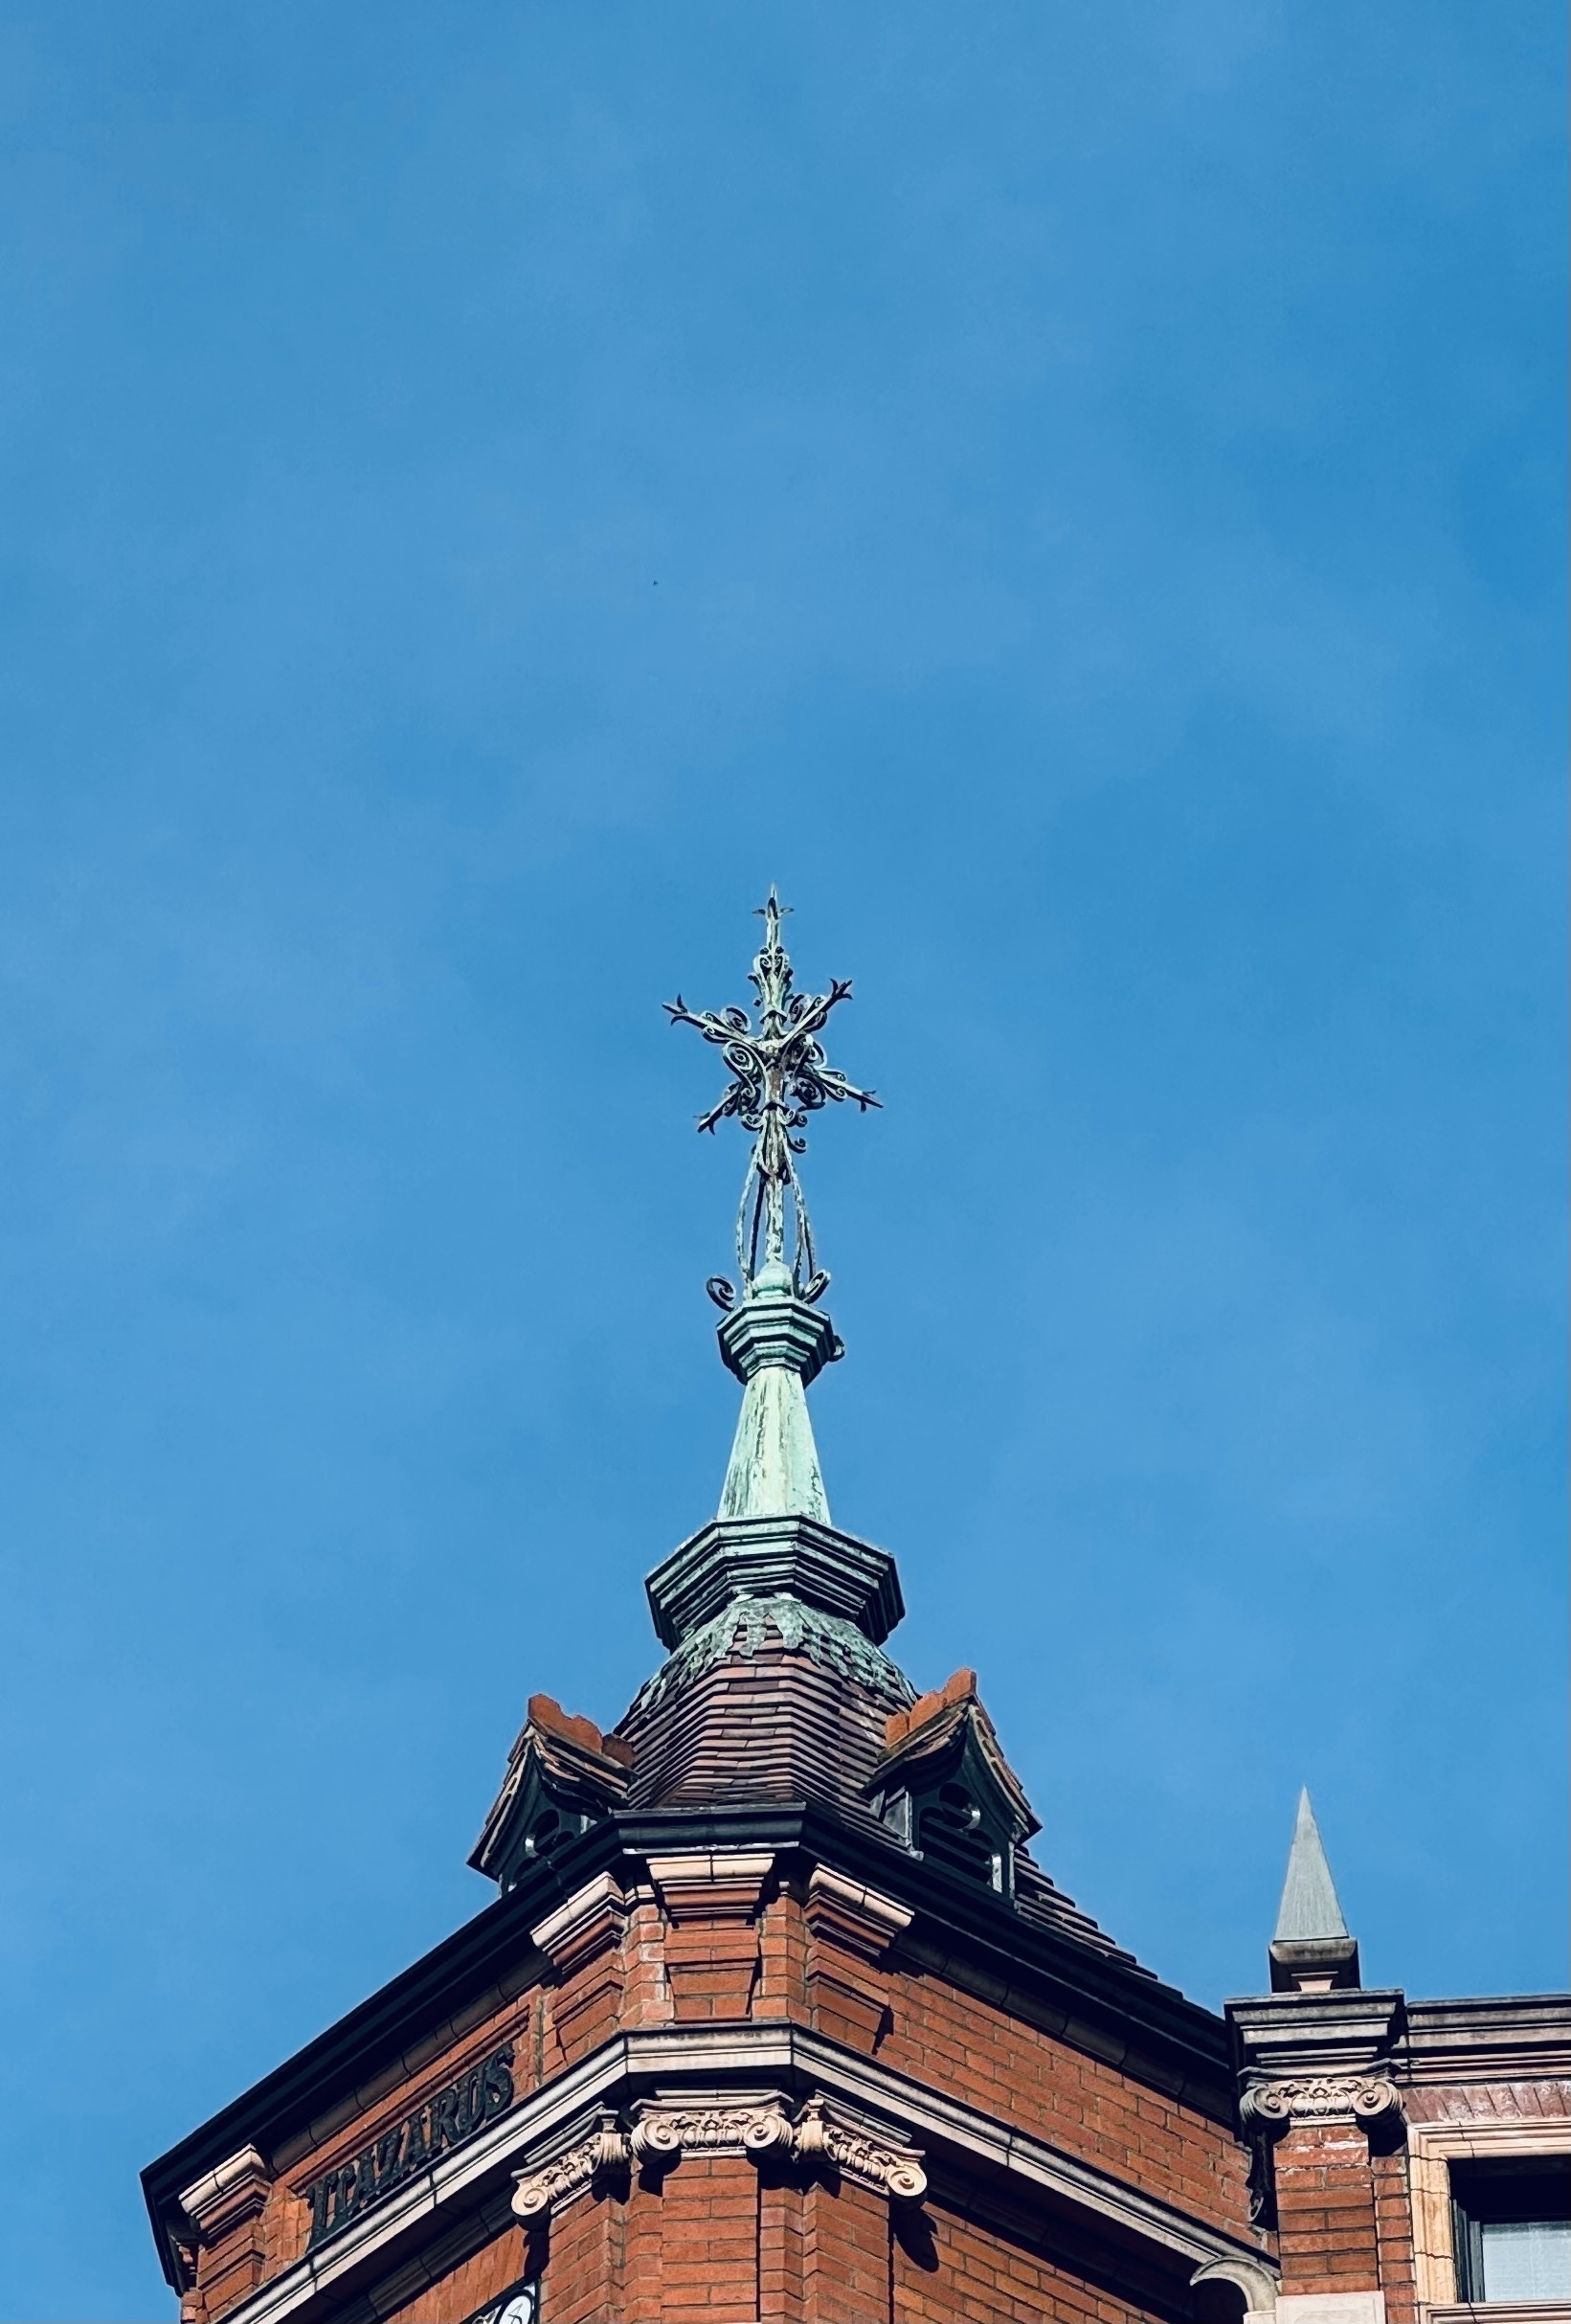 A spiky copper spire on top of a tower.